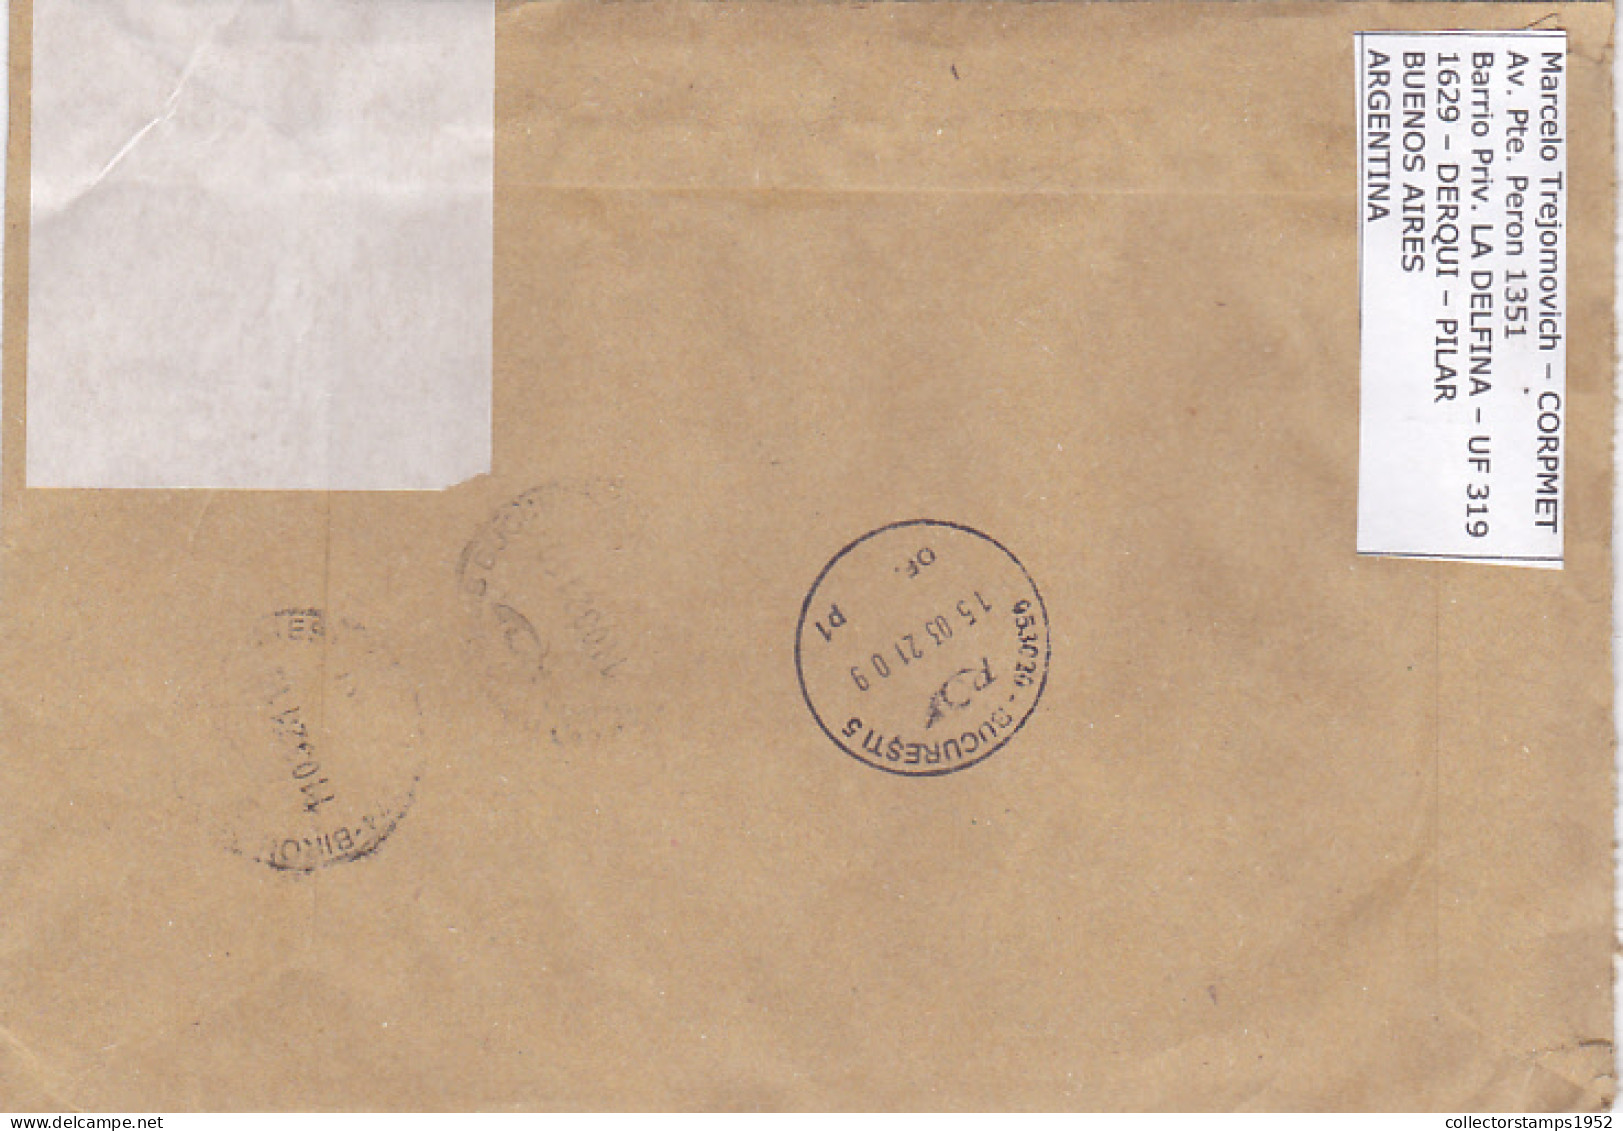 PIER, LANDSCAPES, FINE STAMPS ON REGISTERED COVER, 2021, ARGENTINA - Covers & Documents